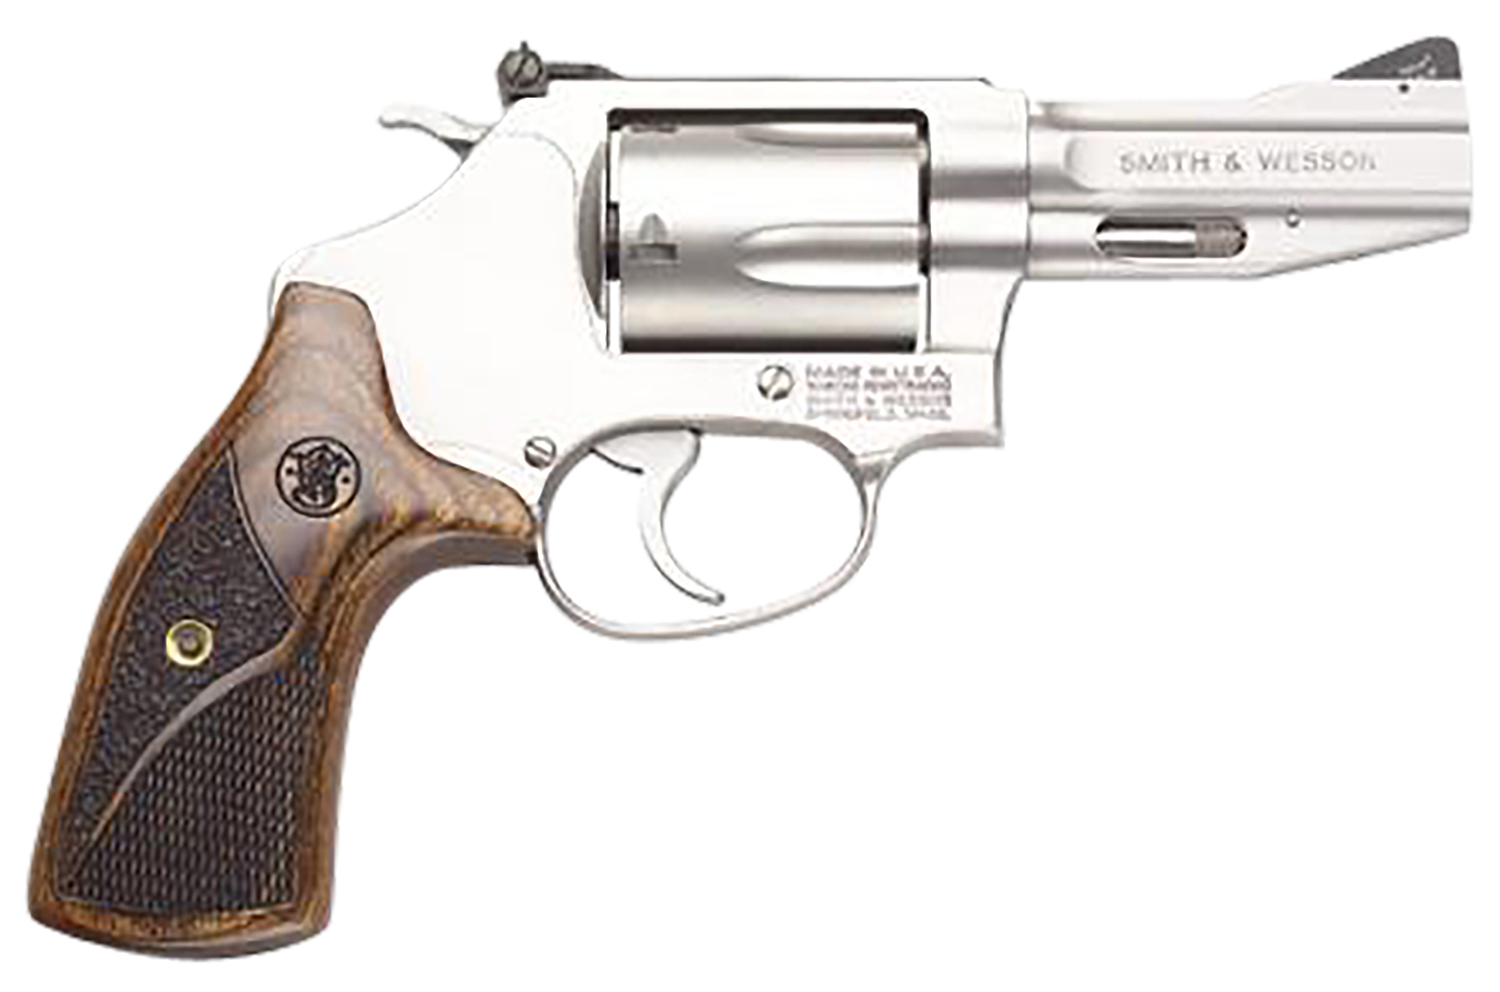 Smith & Wesson 178013 Model 60 Performance Center Pro  357 Mag or 38 S&W Spl +P Stainless Steel 3